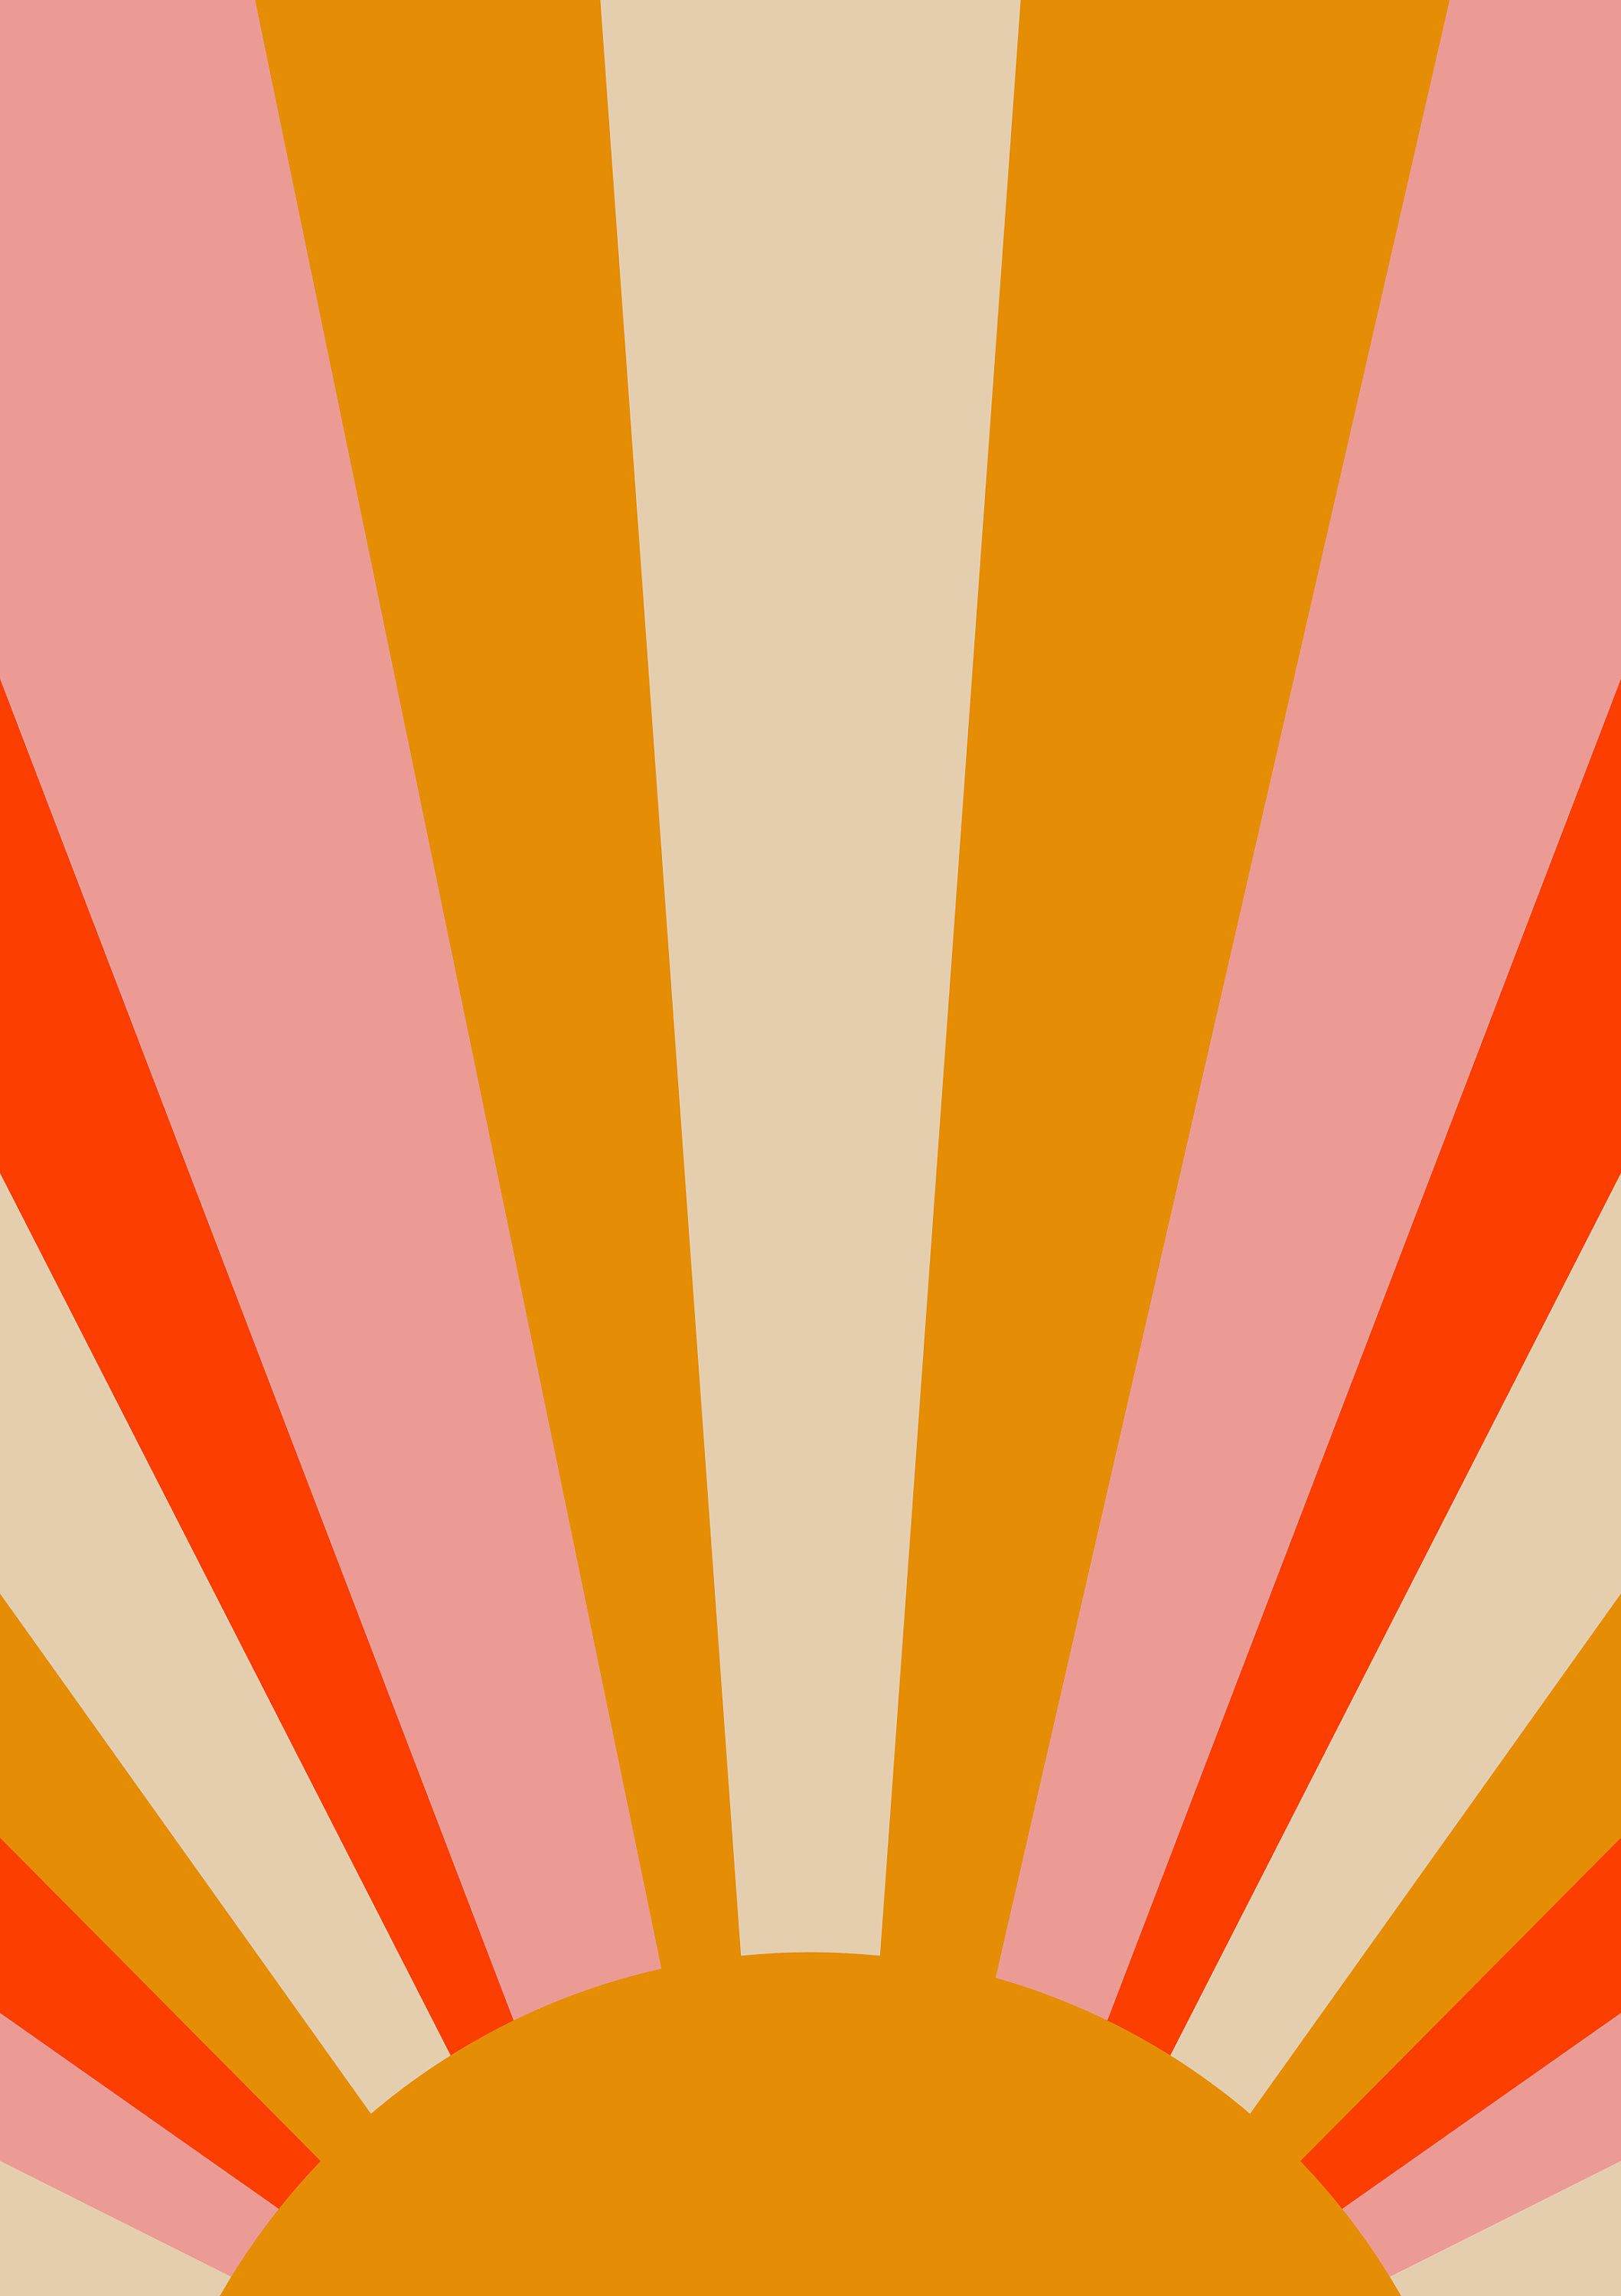 A sunset with orange and pink stripes - 70s, sun